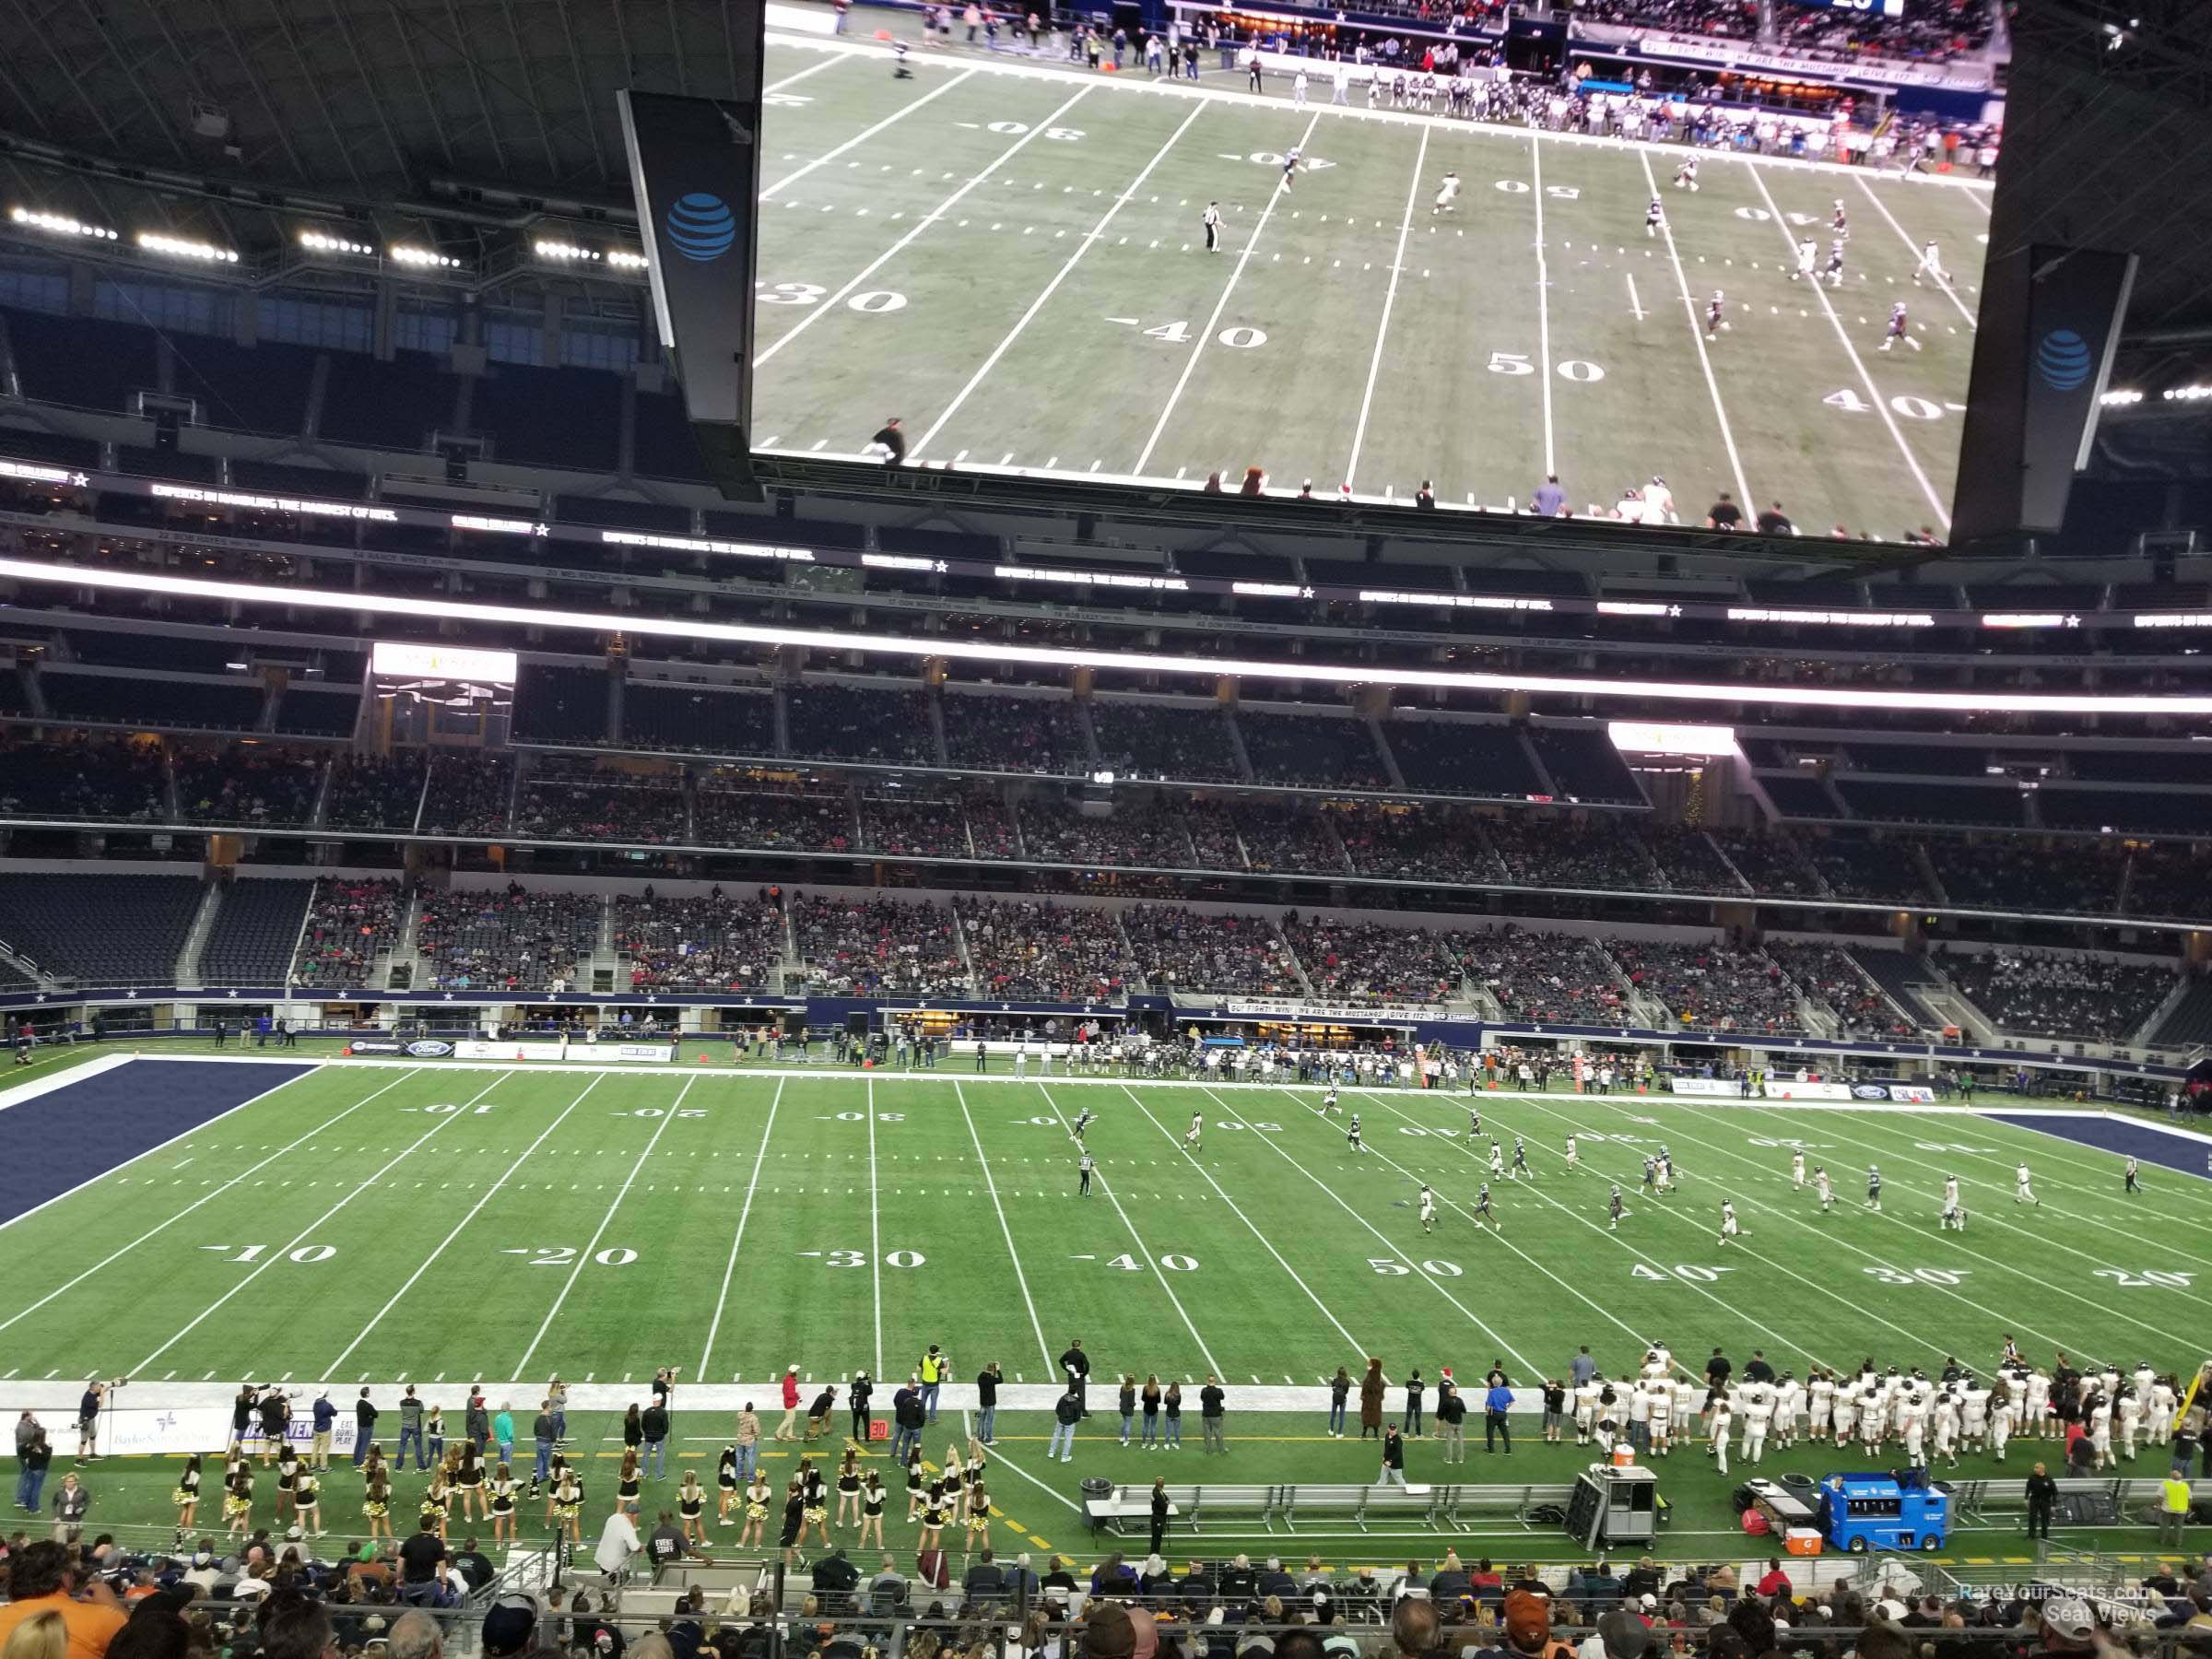 section c237, row 10 seat view  for football - at&t stadium (cowboys stadium)